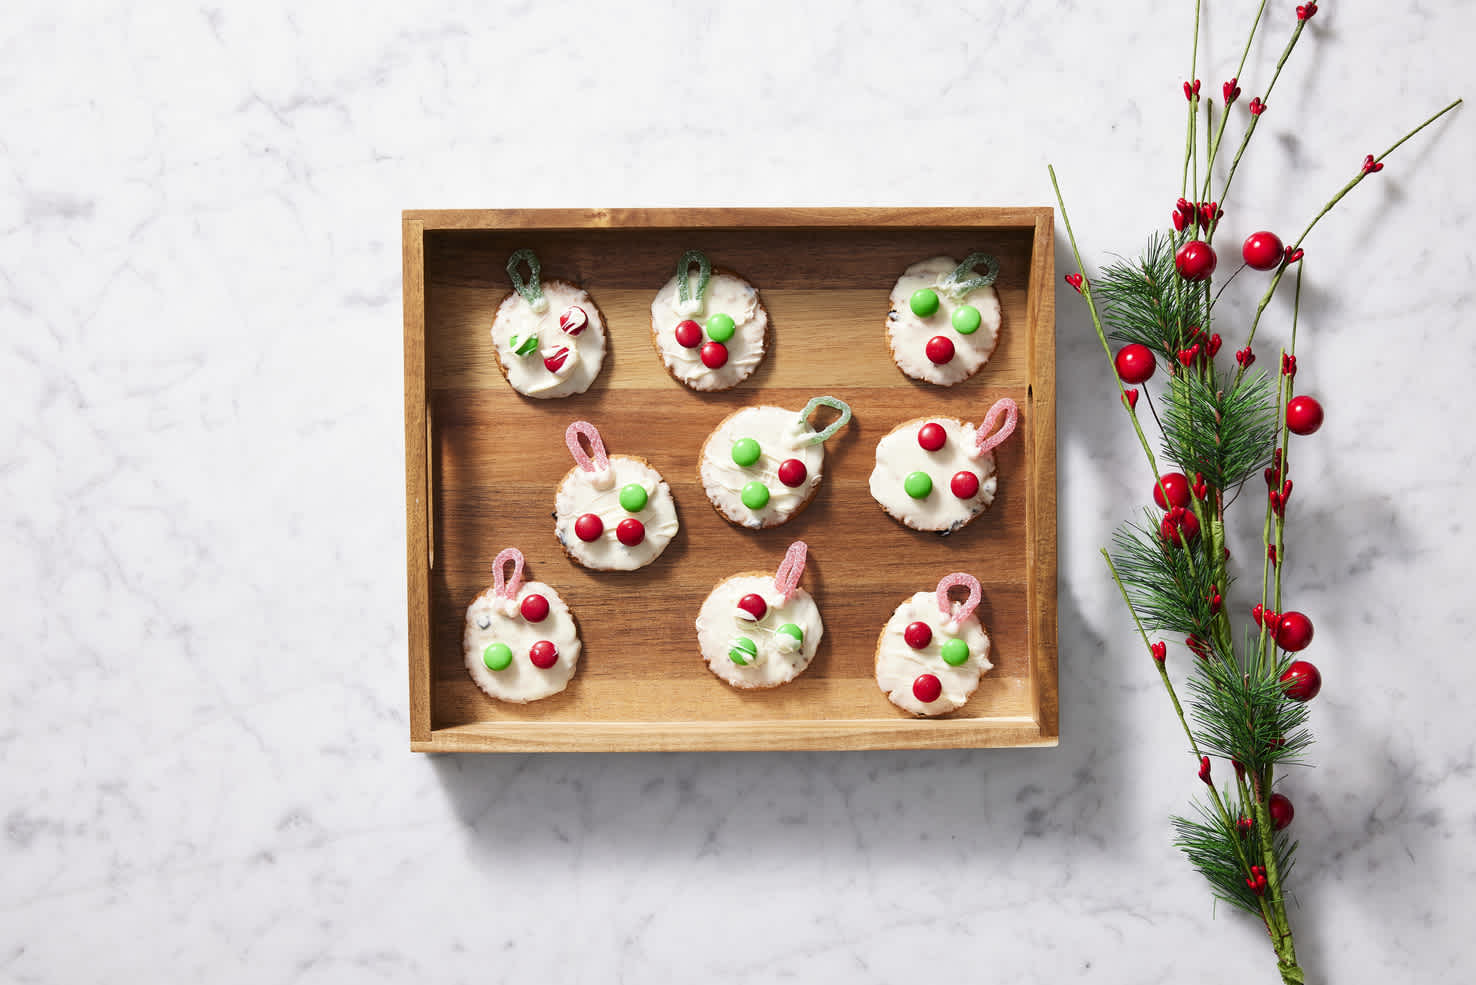 Image of Arnott's Christmas Baubles, using Venetian Biscuits 